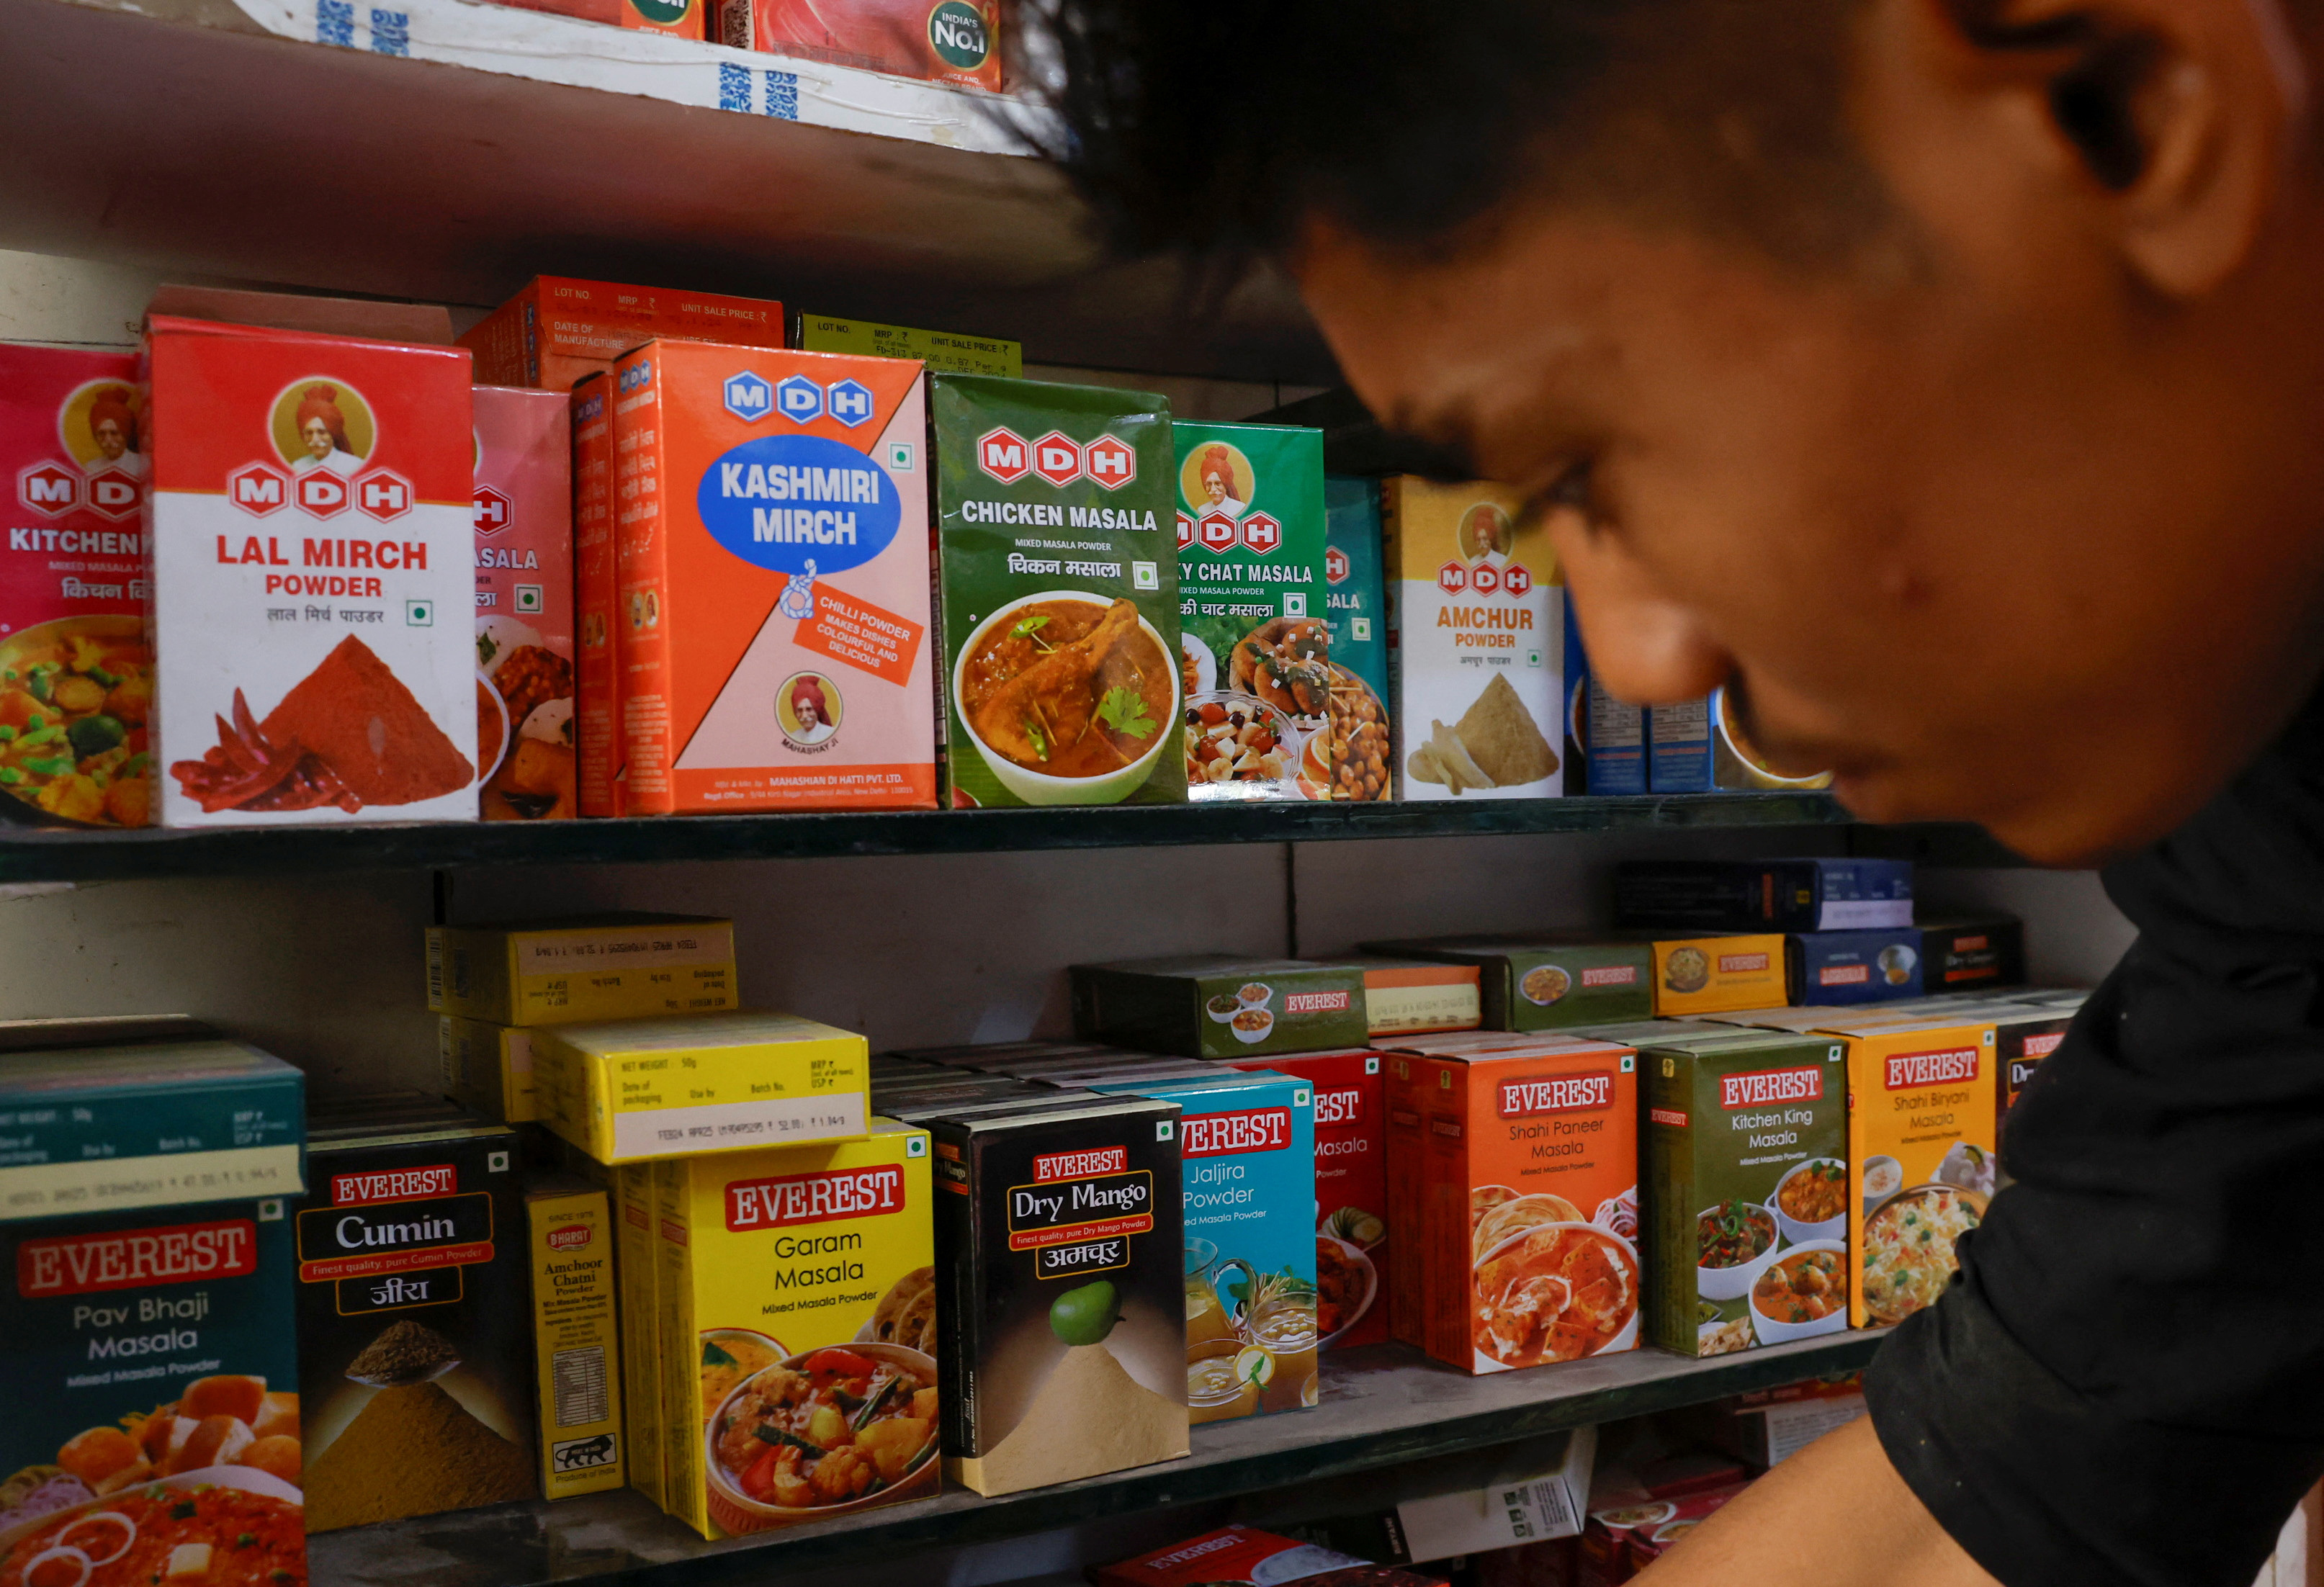 A man stands near the spice boxes of MDH and Everest kept on the shelf of a shop at a market in New Delhi